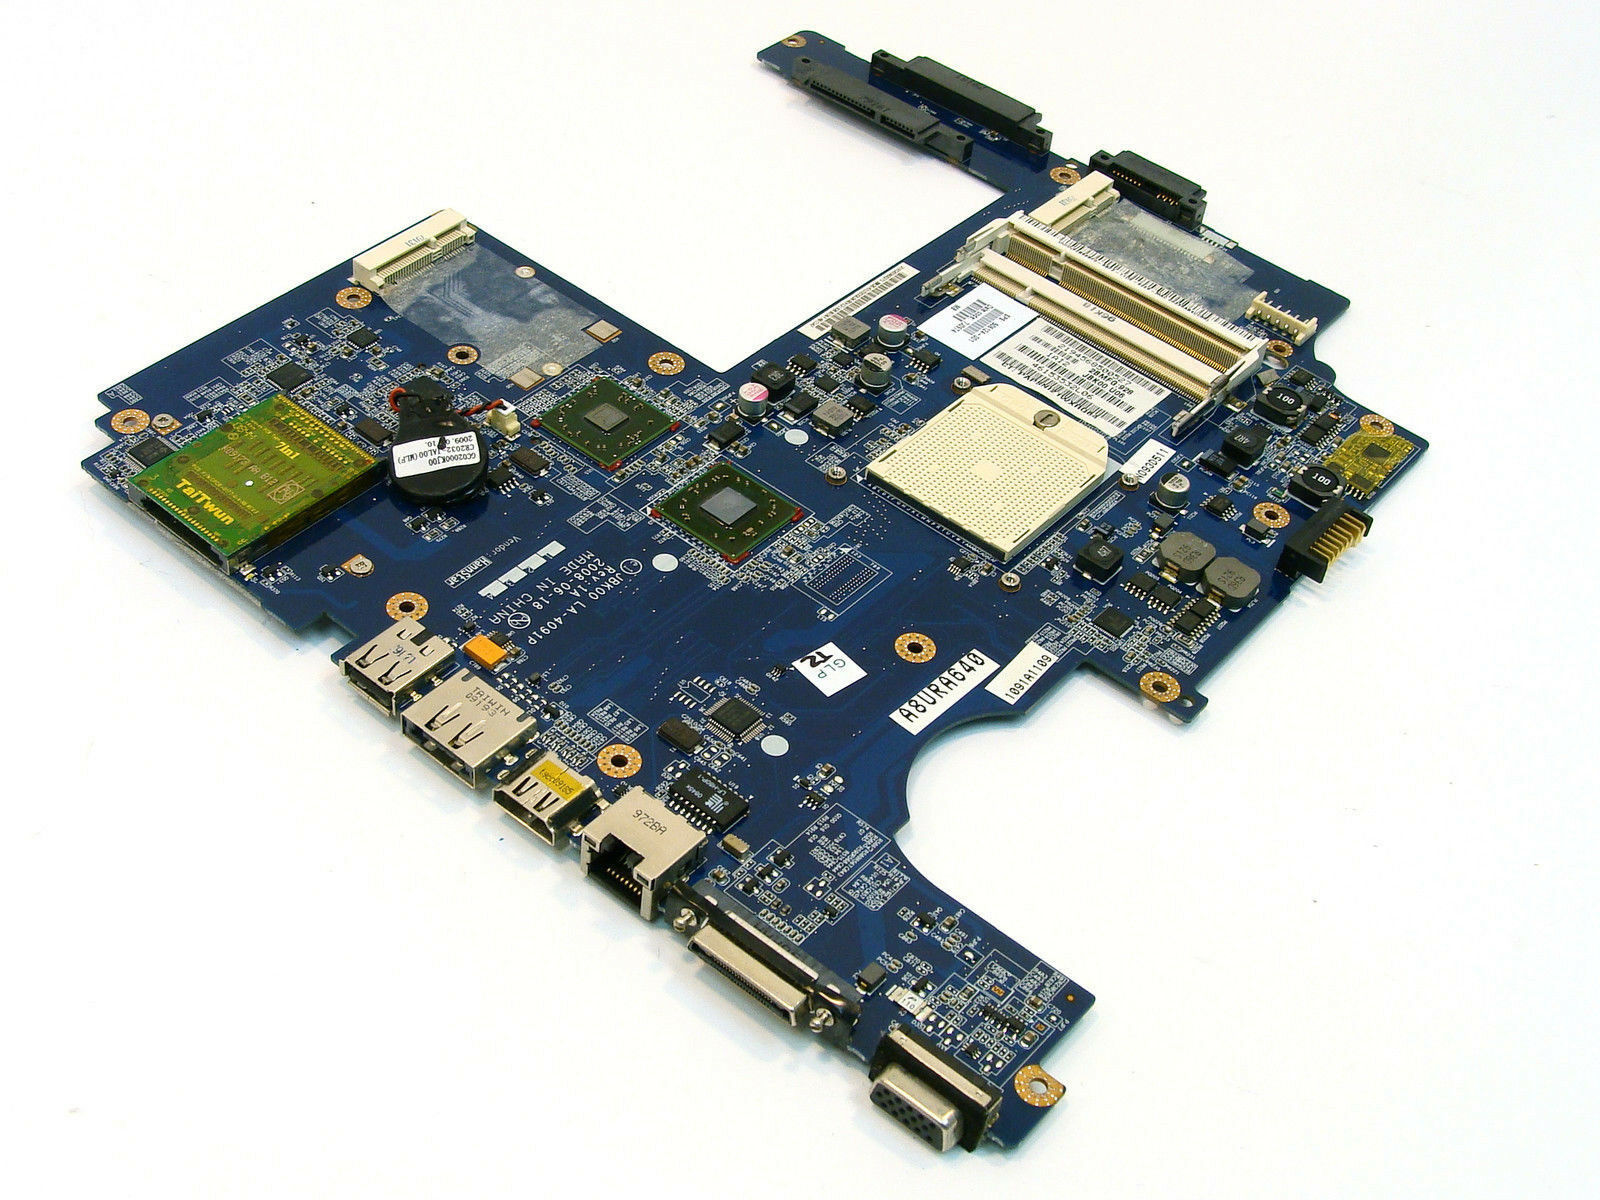 Genuine HP PAVILION DV7-1200 1245dx 1267cl 506124-001 Motherboard HDMI Tested Tracking Number is INCLUDED,